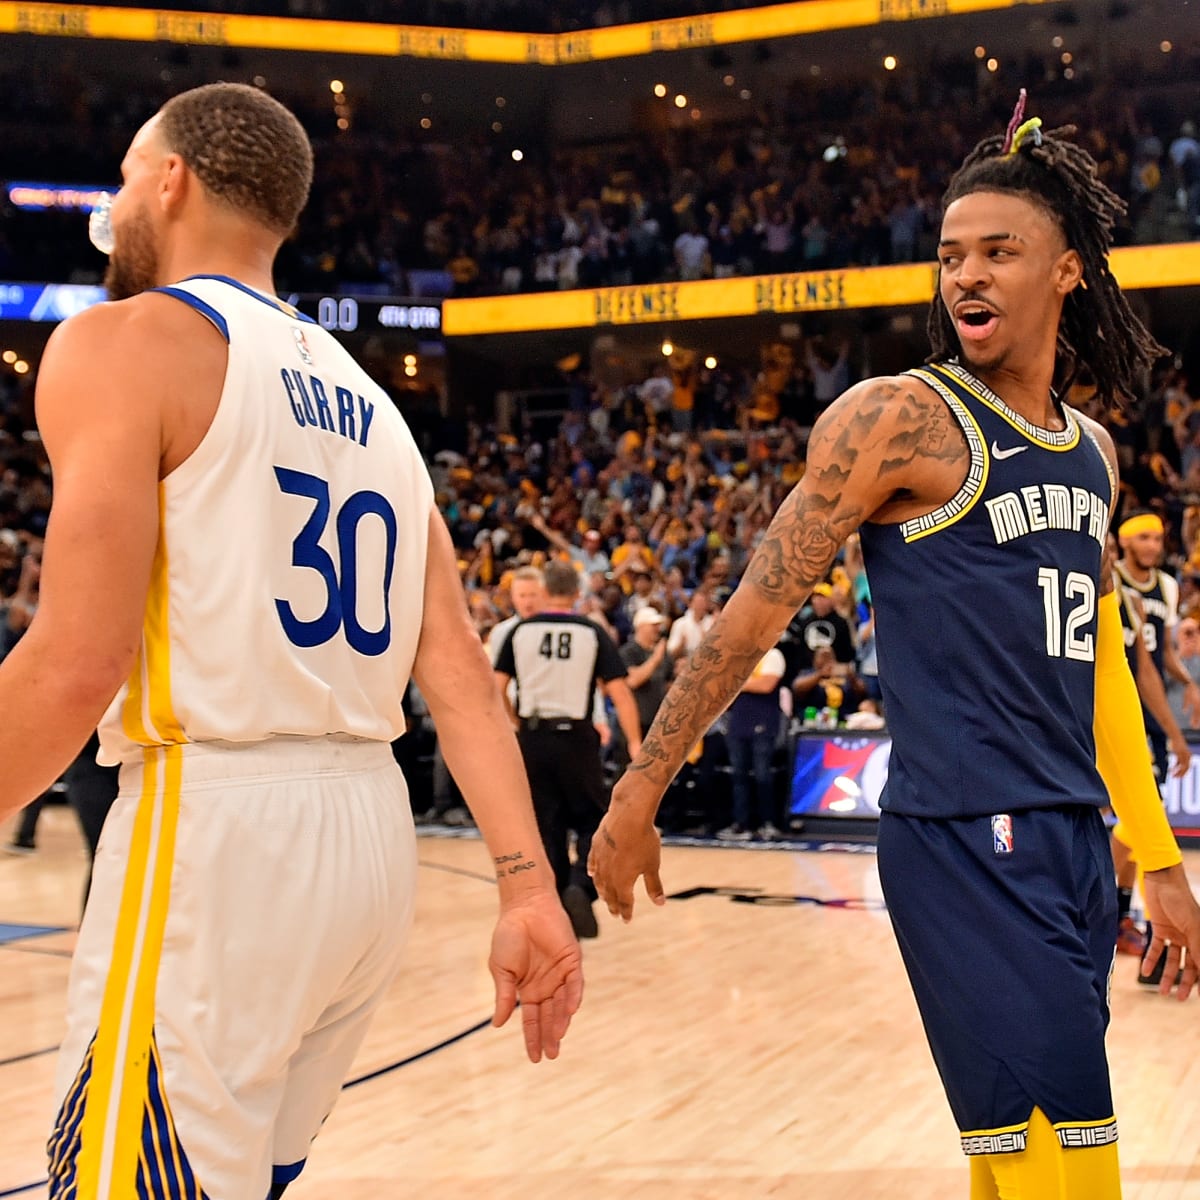 Ja Morant-less Grizzlies rout Curry, Warriors 131-110